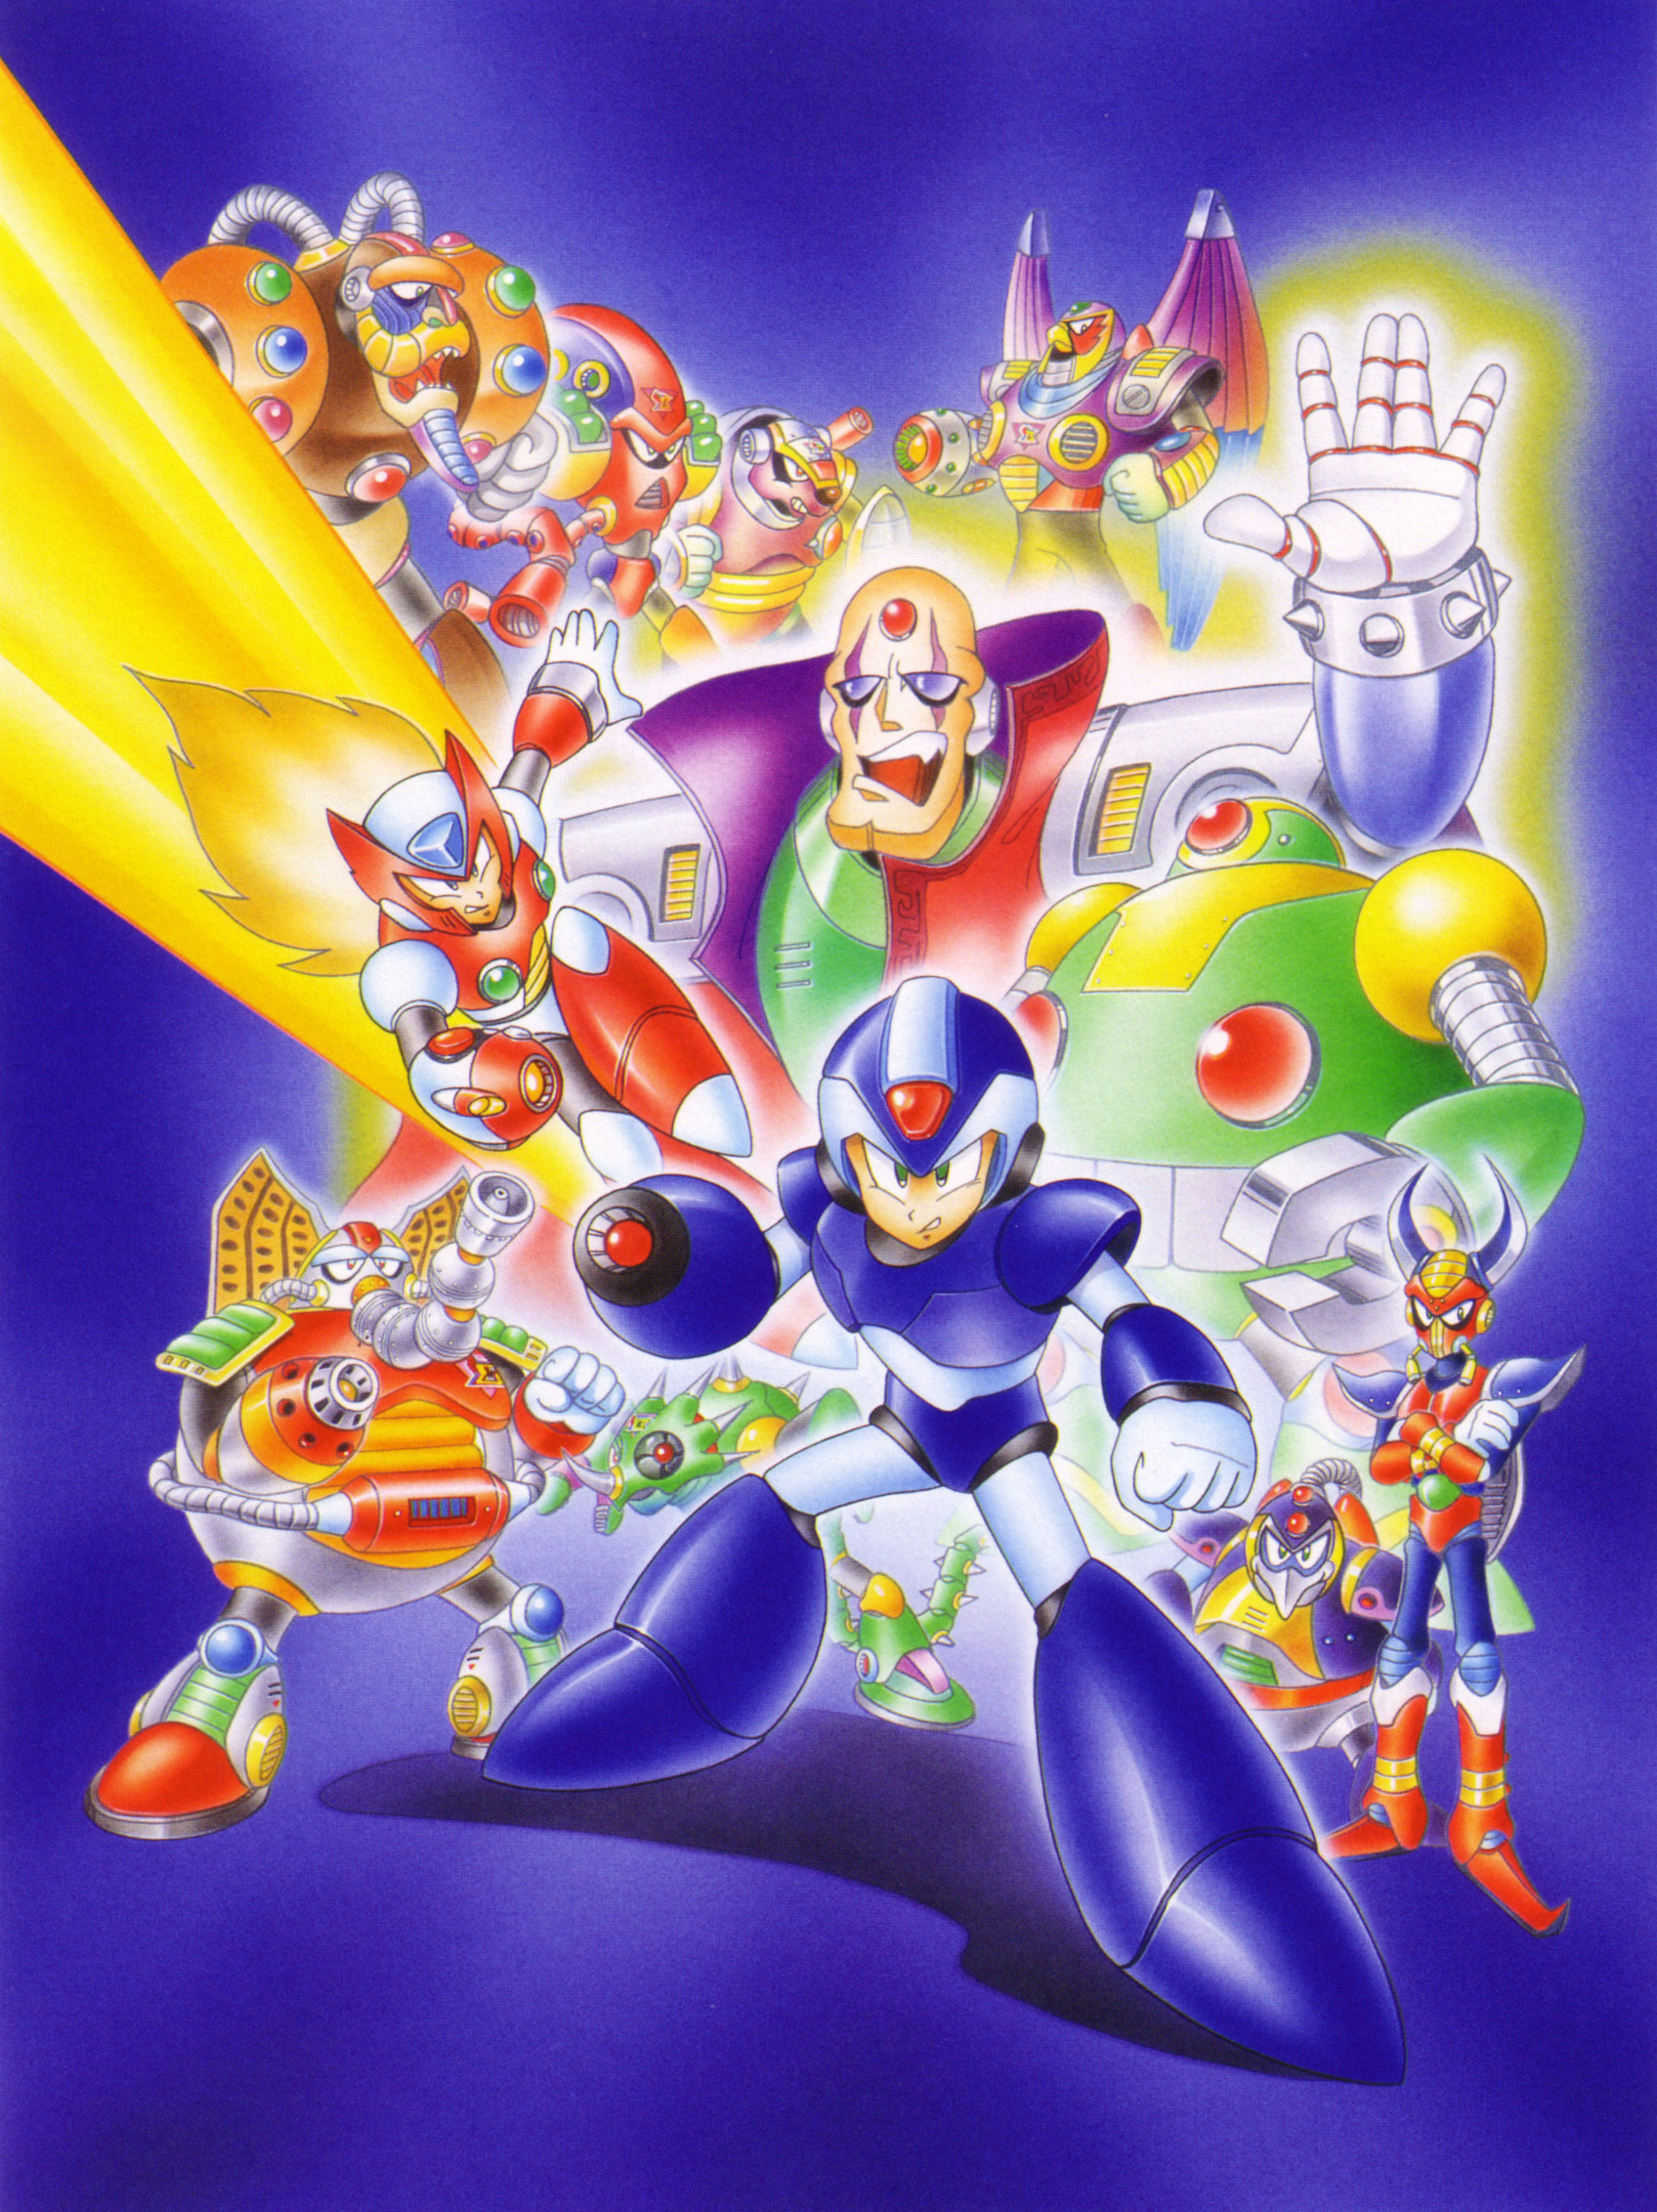 Mega Man X/Heart Tanks — StrategyWiki  Strategy guide and game reference  wiki